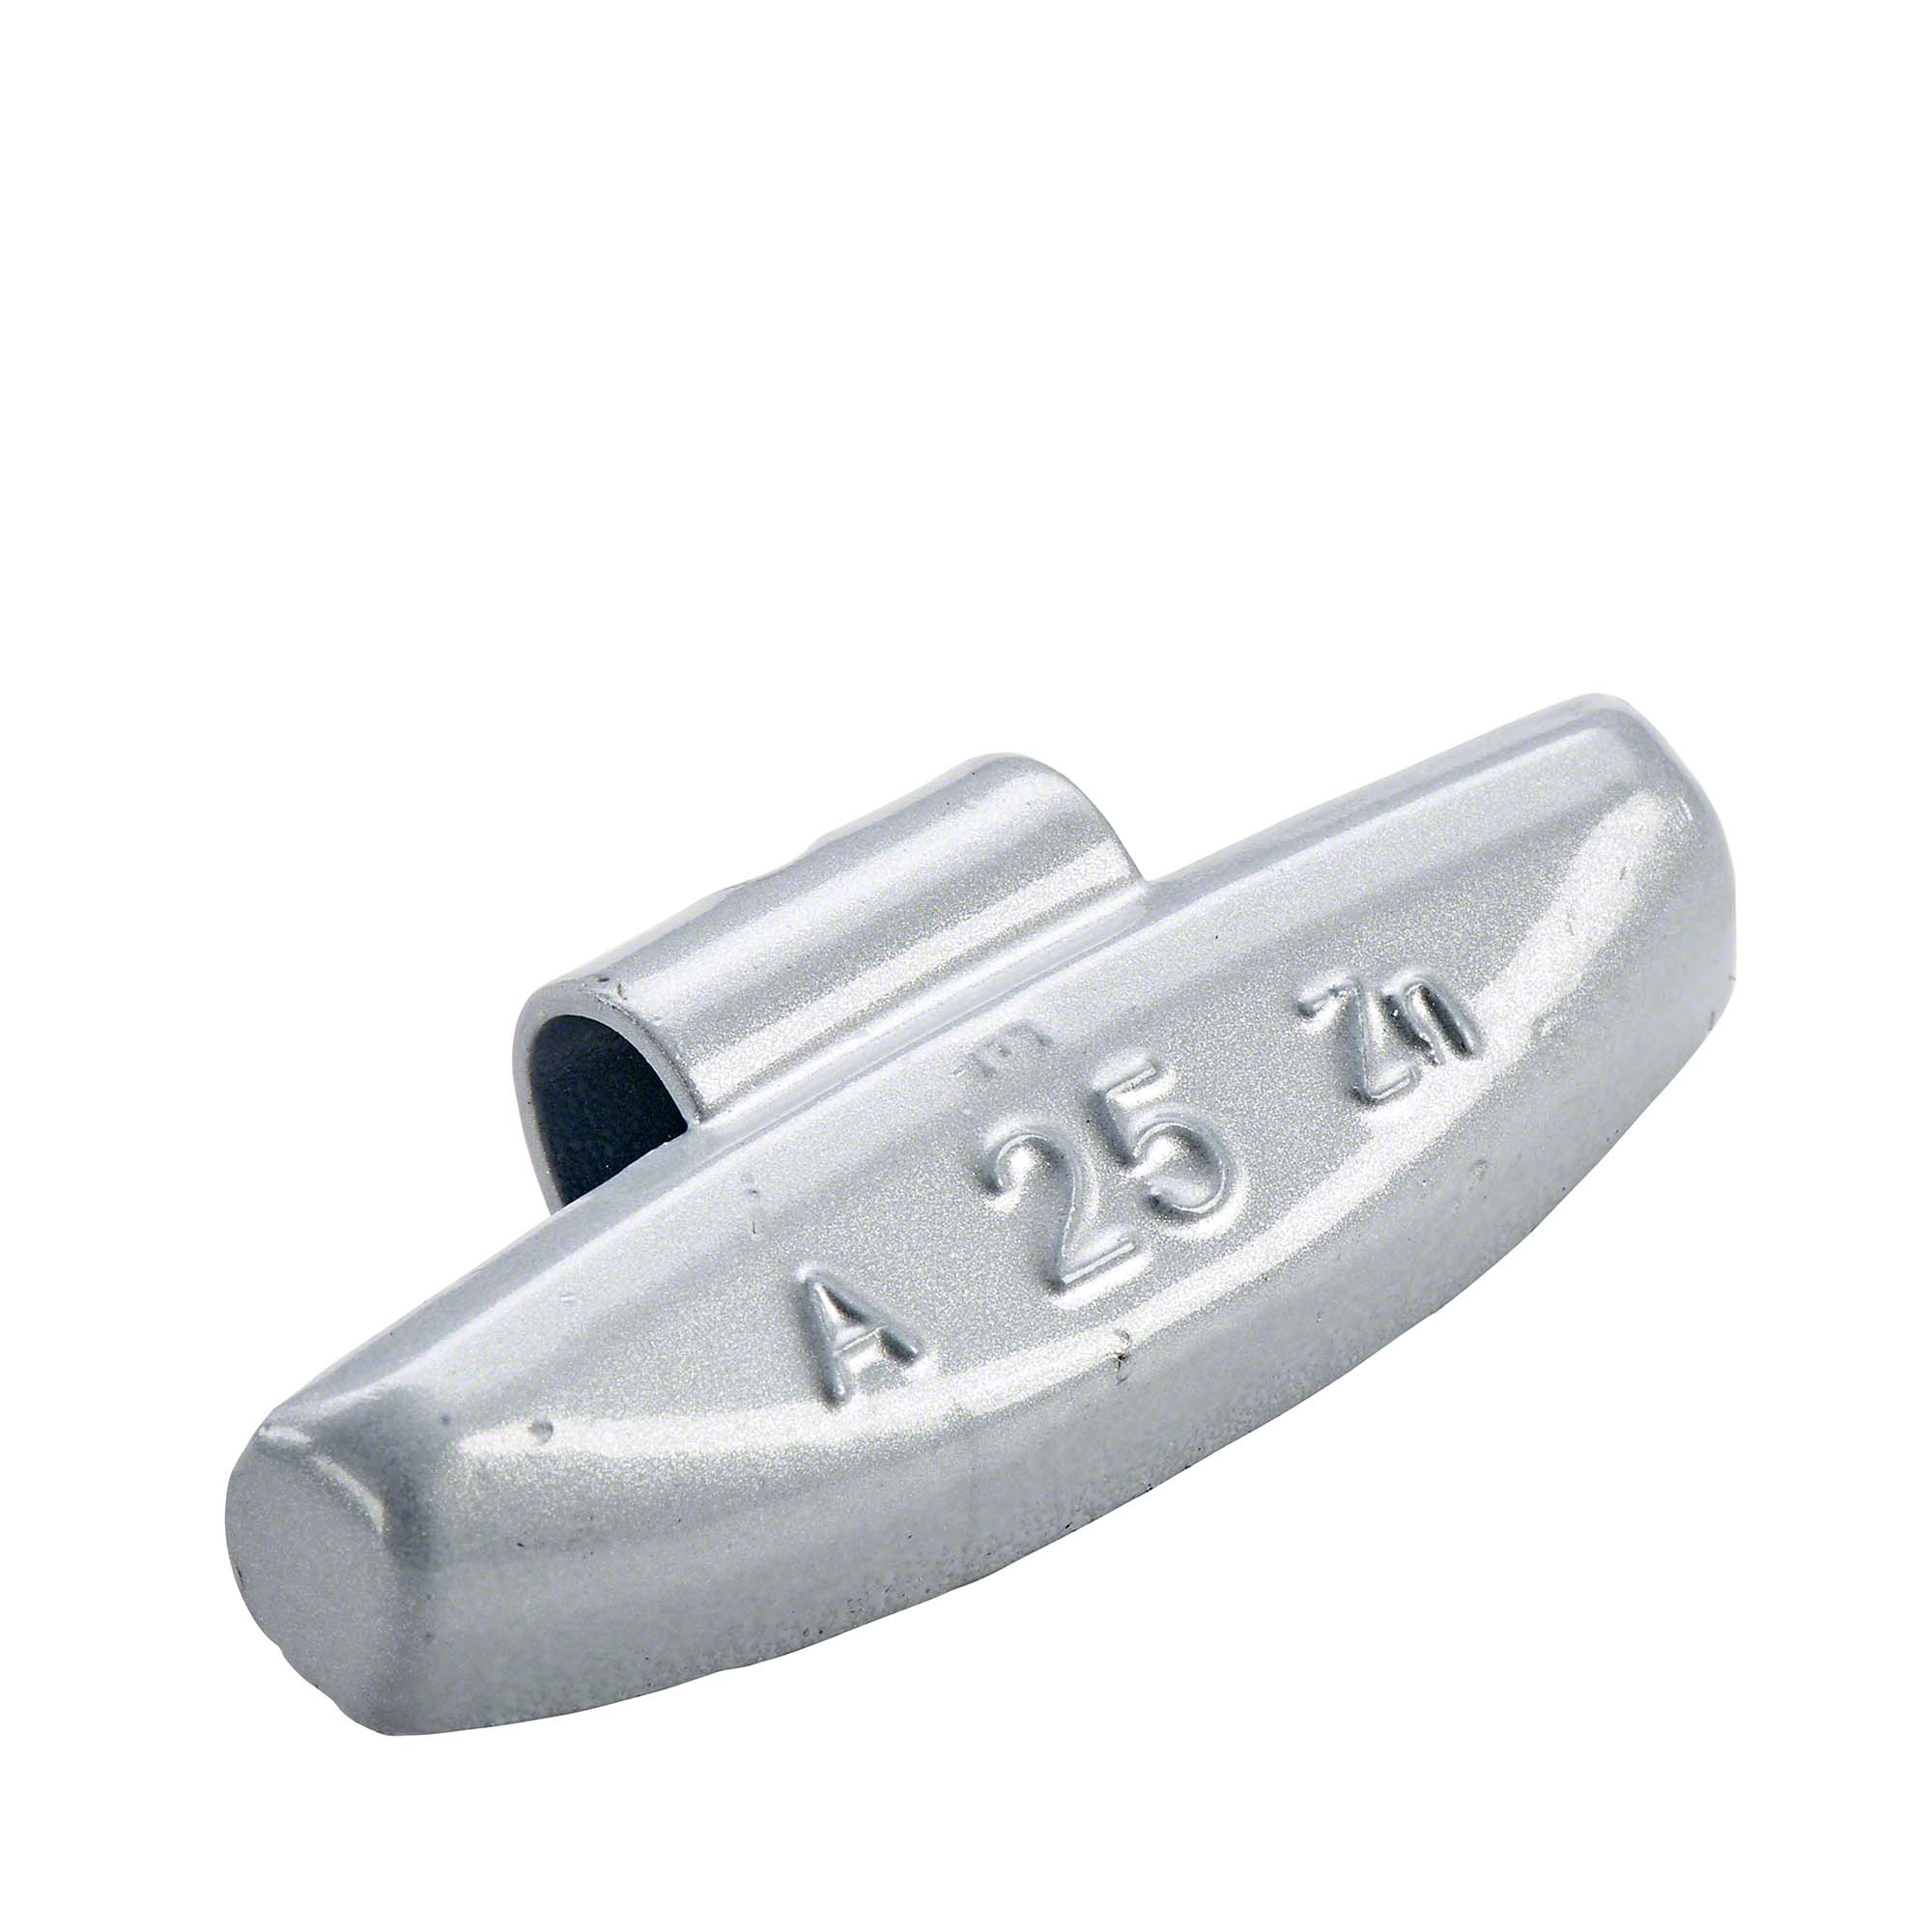 knock-on weight - Typ 63, 25 g, zinc, silver